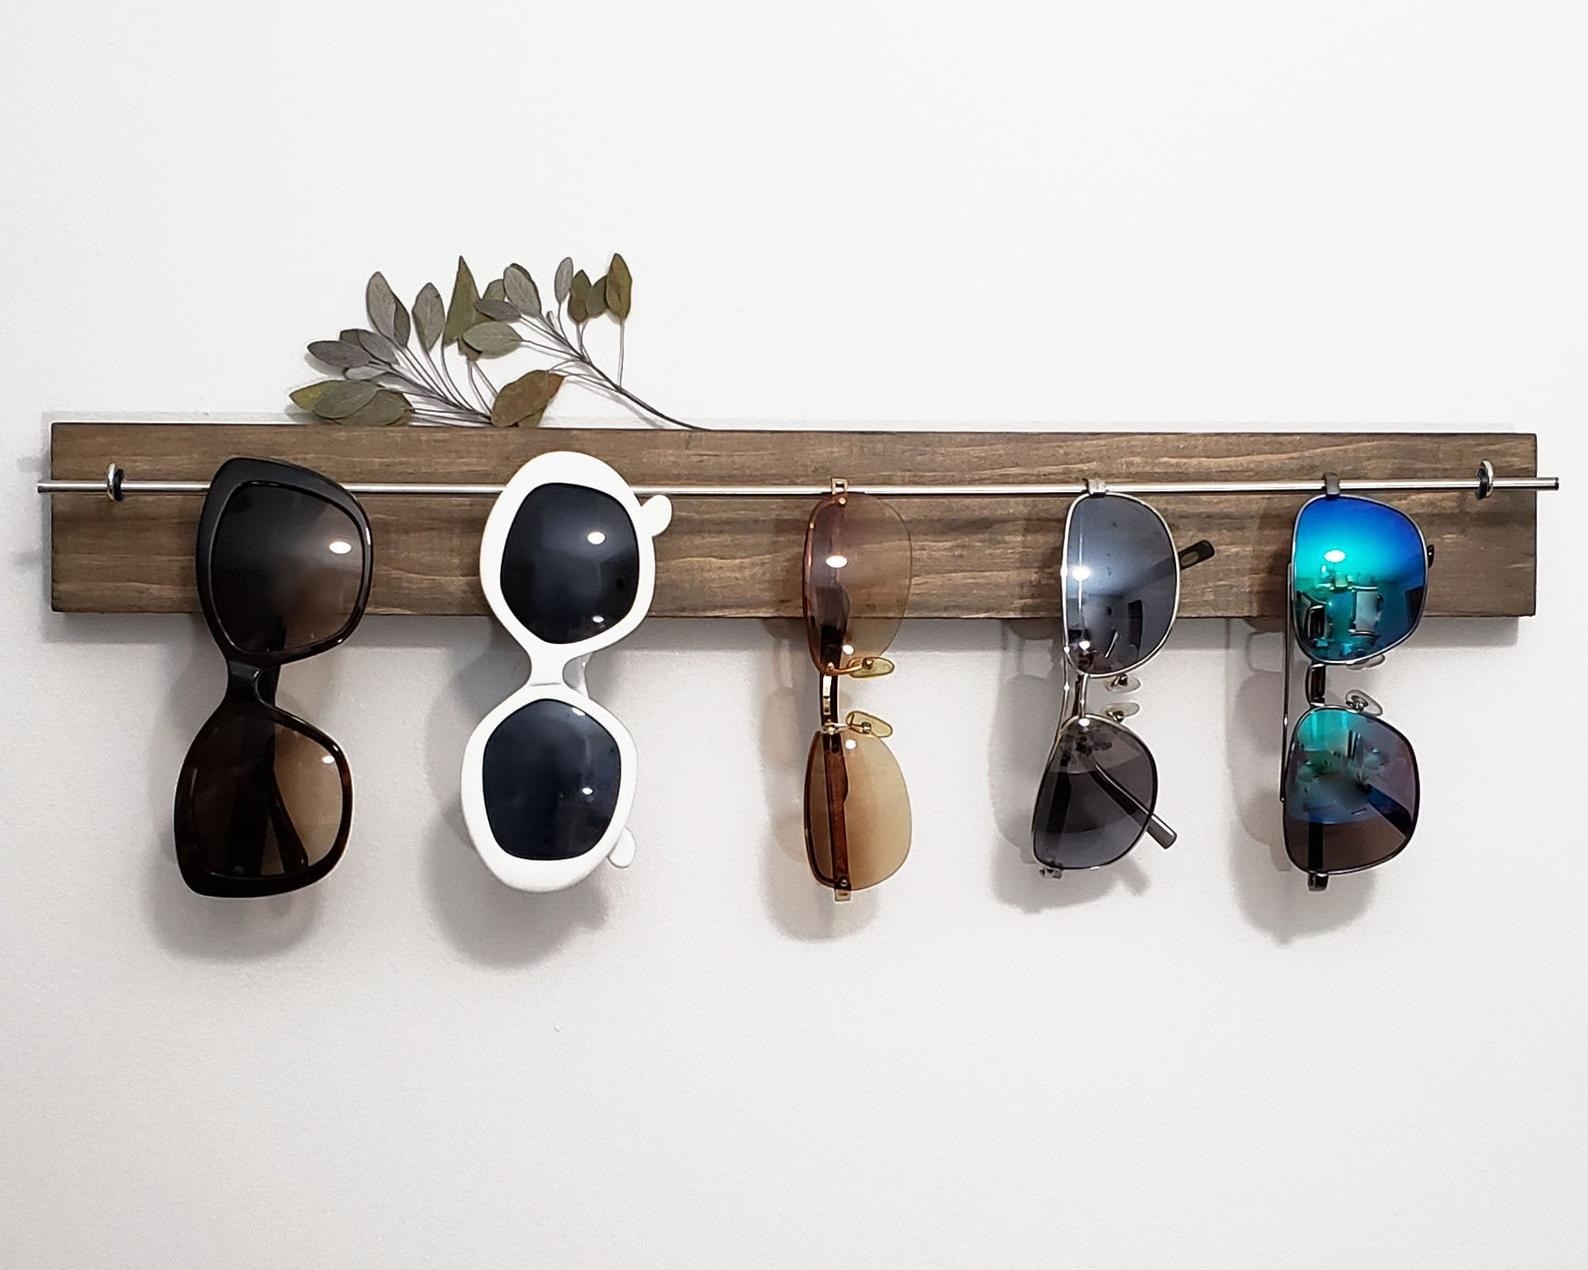 five pairs of sunglasses hanging on the sunglasses holder